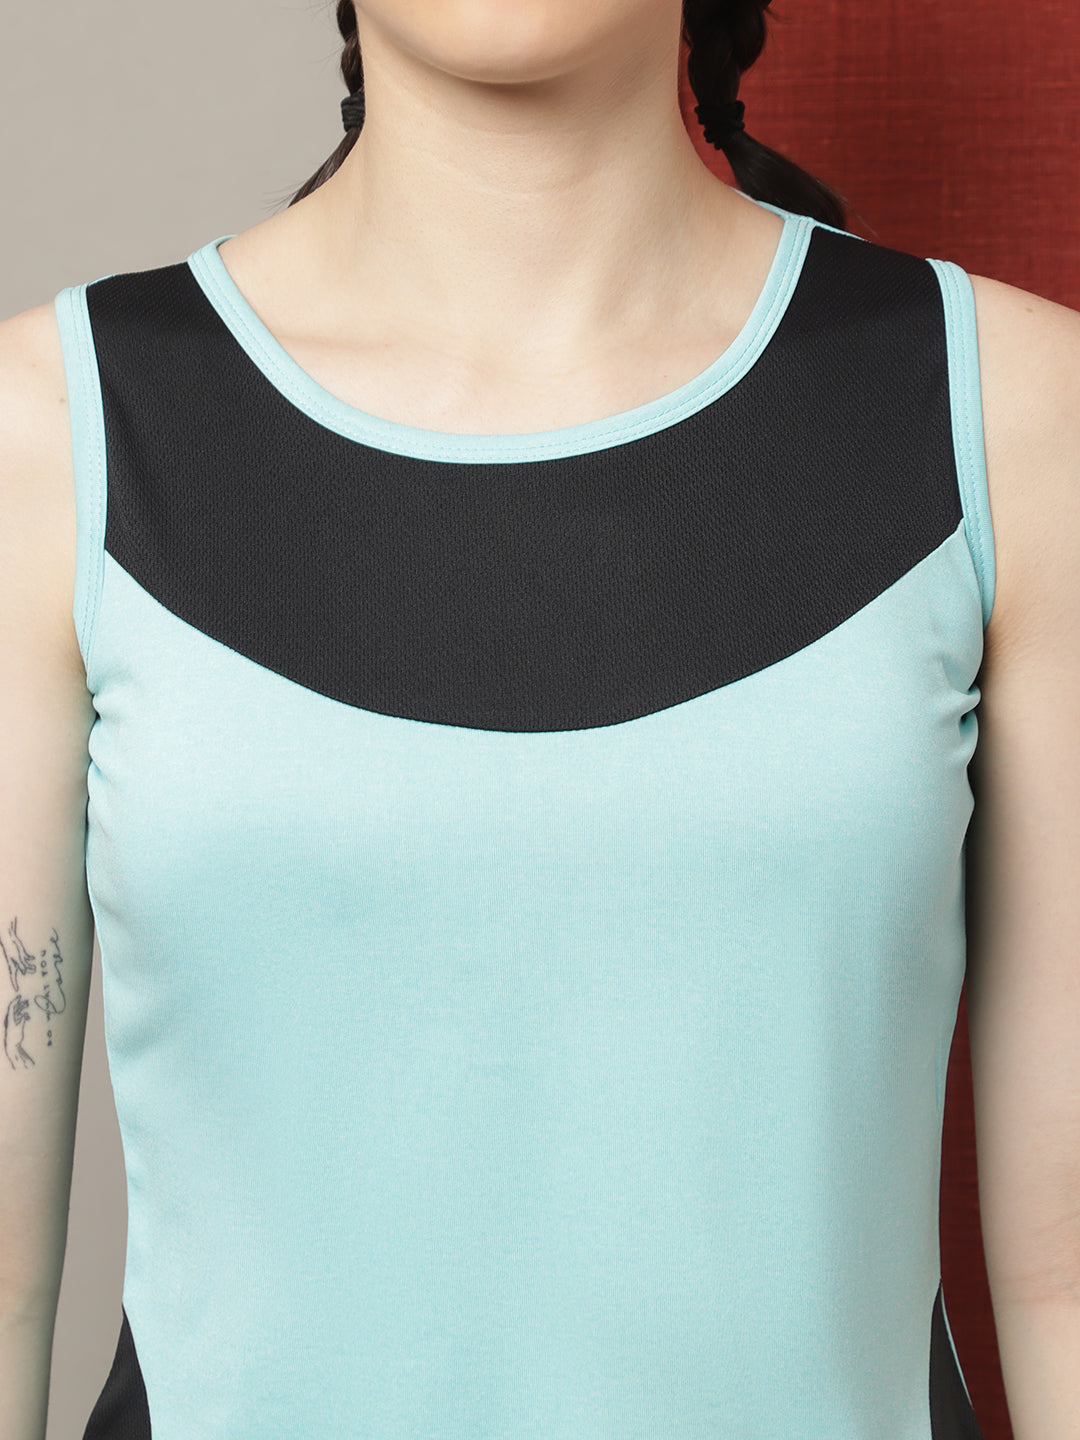 Womens Sleeveless Dry-Fit Sports Tank Top - Friskers